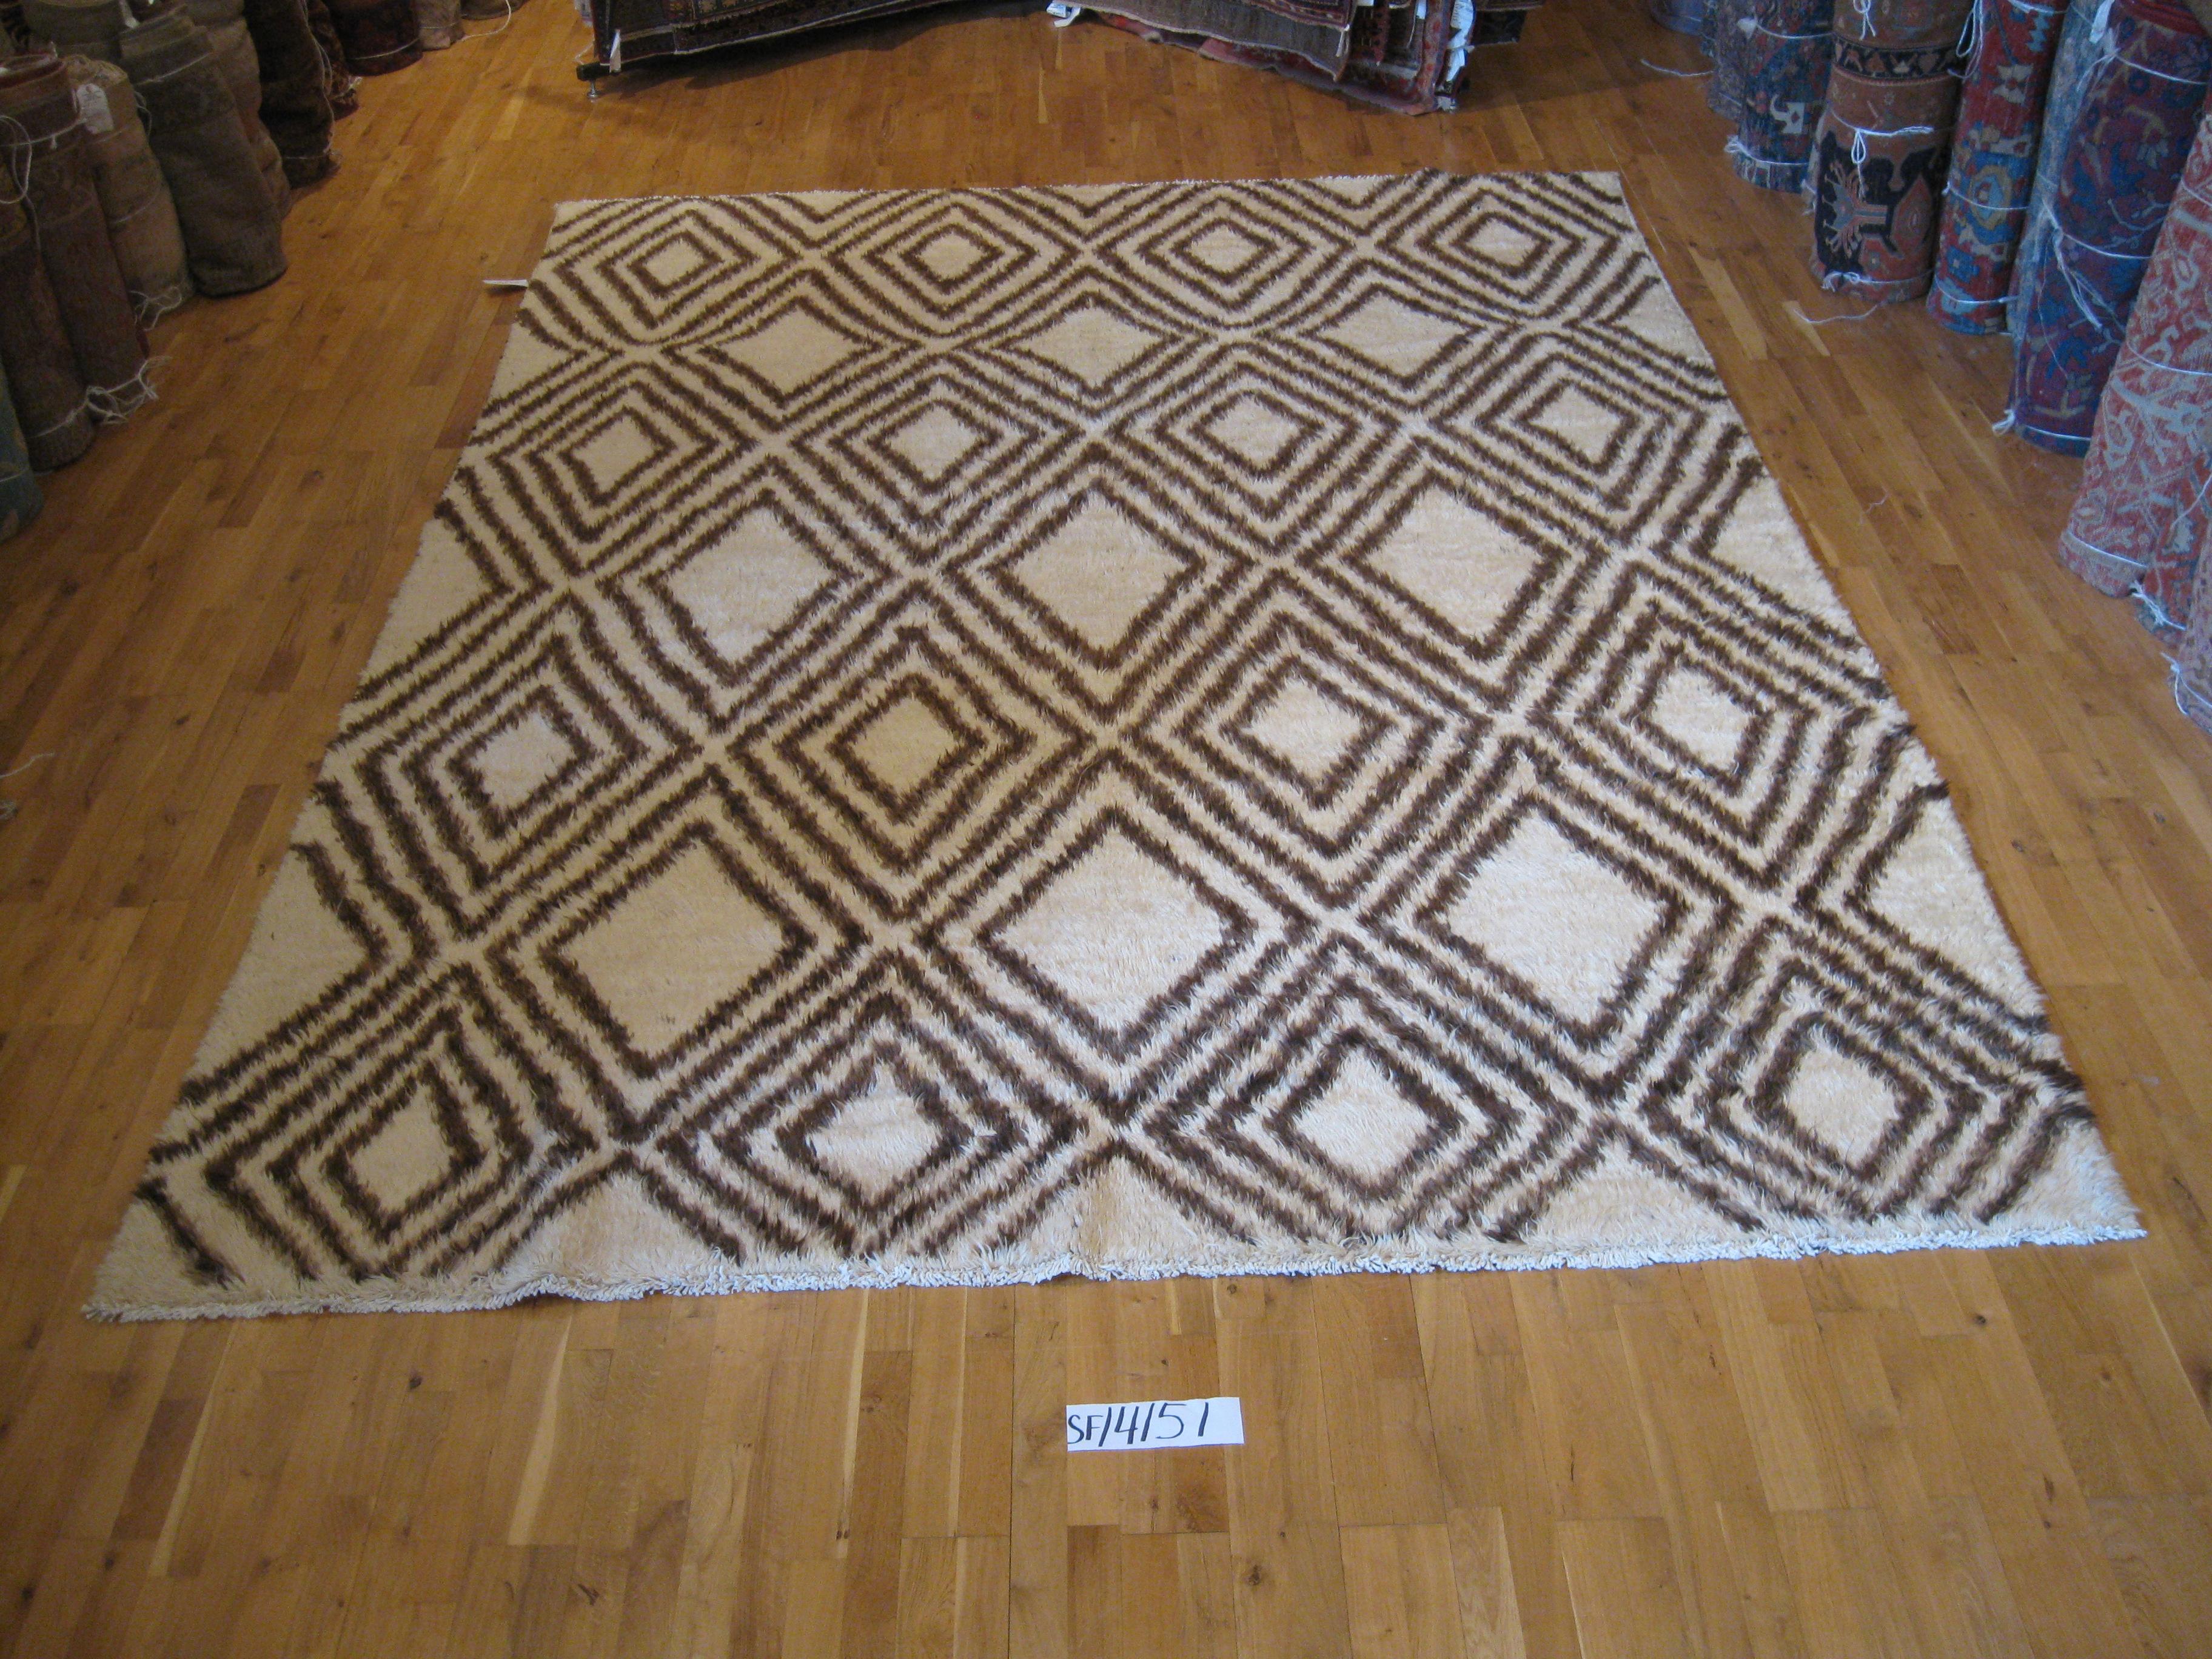 The Beni Ourain style is one of the most popular Moroccan rug types and with this rug it's easy to see why. The eye-catching bold geometric diamond design in brown and ivory and lush thick pile have huge visual and tactile appeal. A rug for anywhere